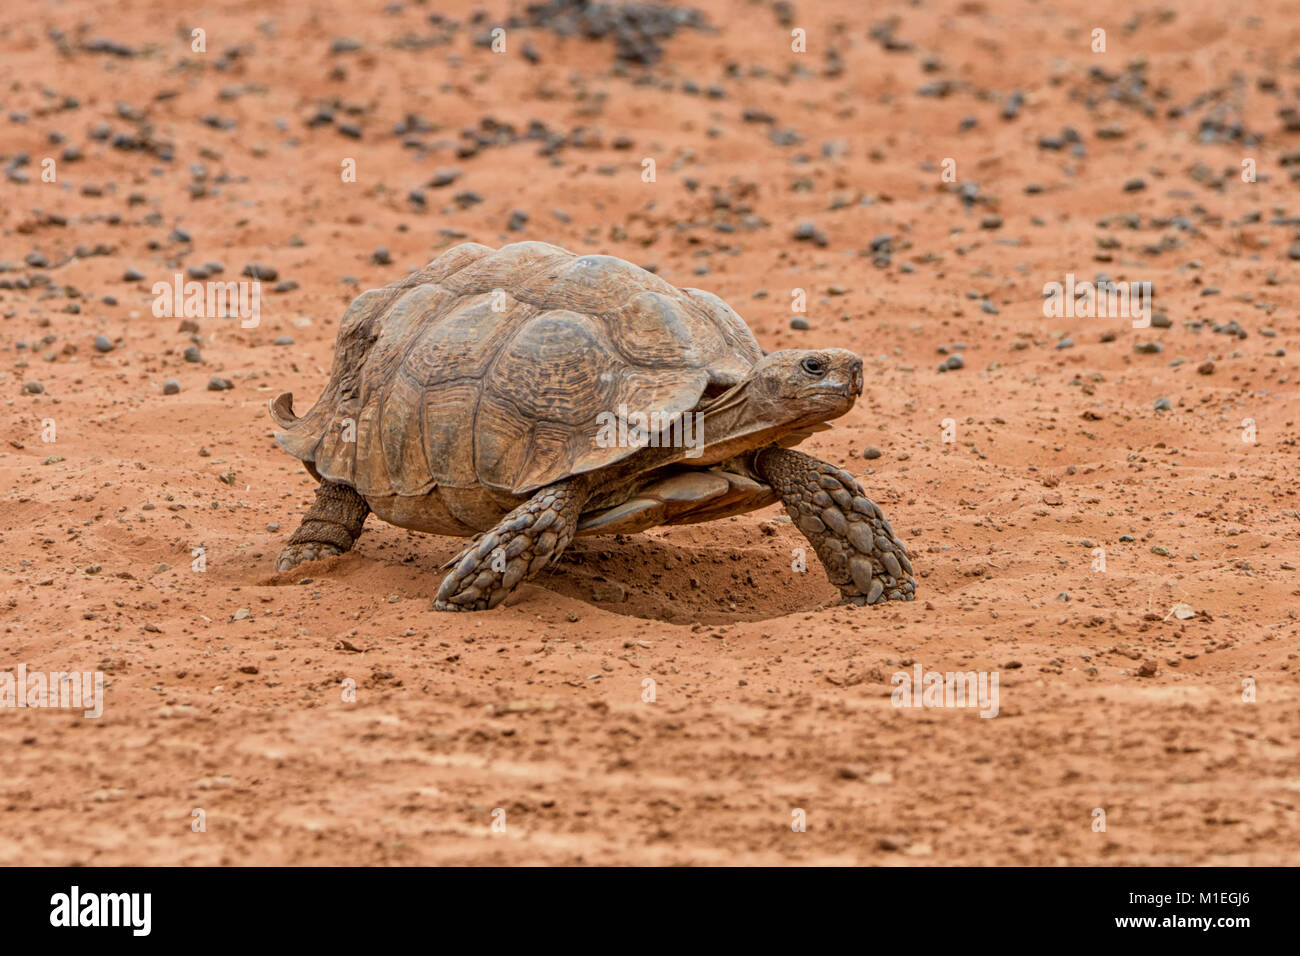 A leopard Tortoise in Southern African savanna Stock Photo